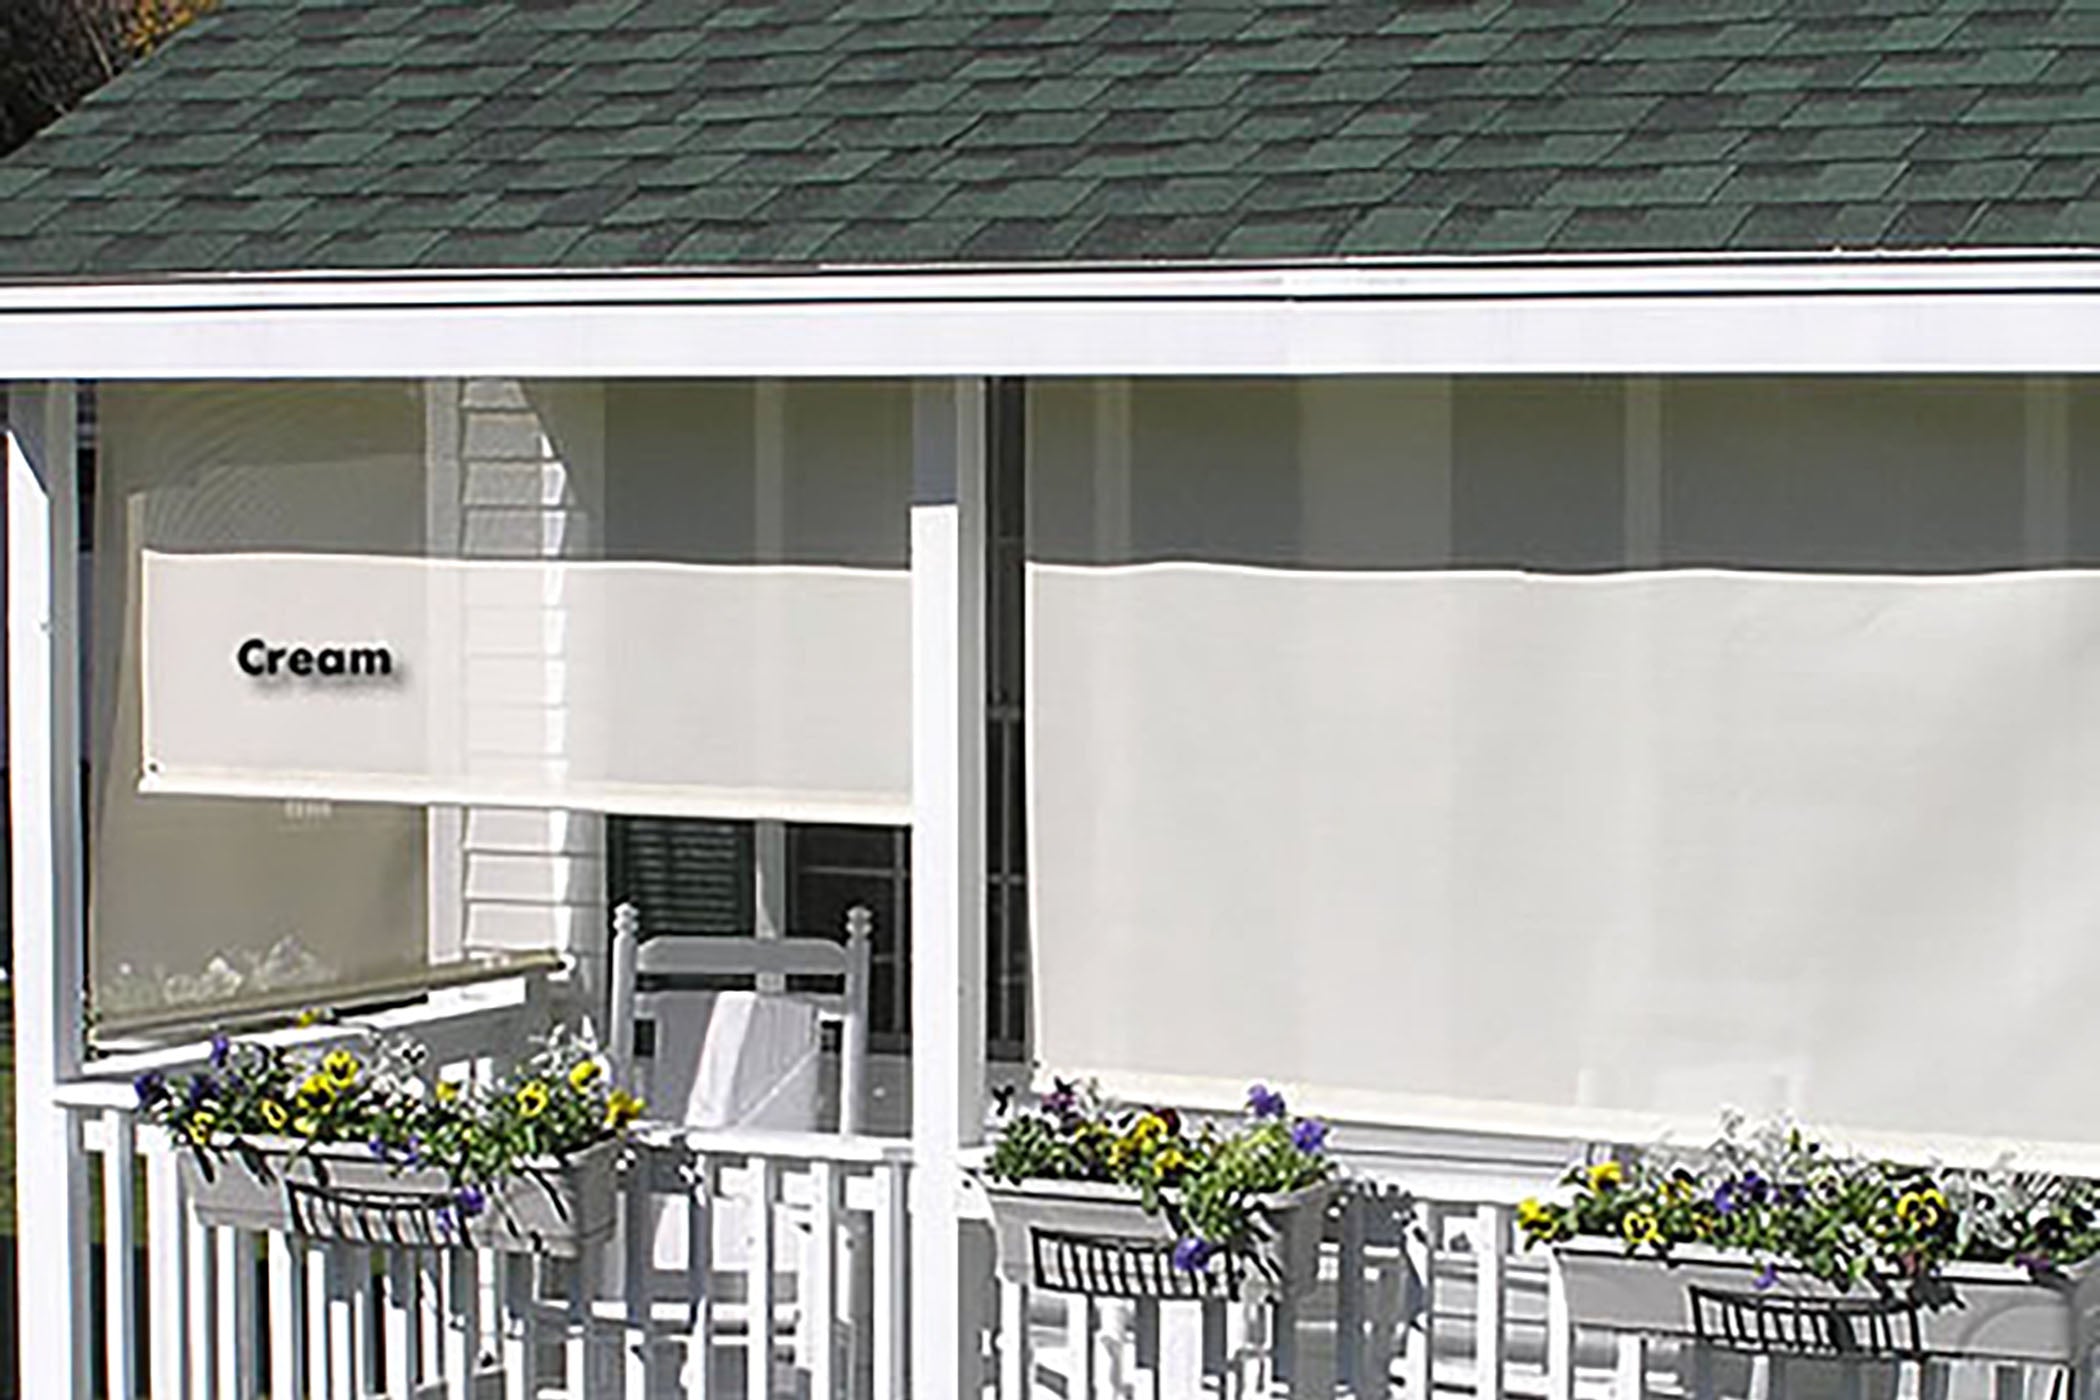 Motorized Retractable Awnings Buy Online From MotorizedAwningscom